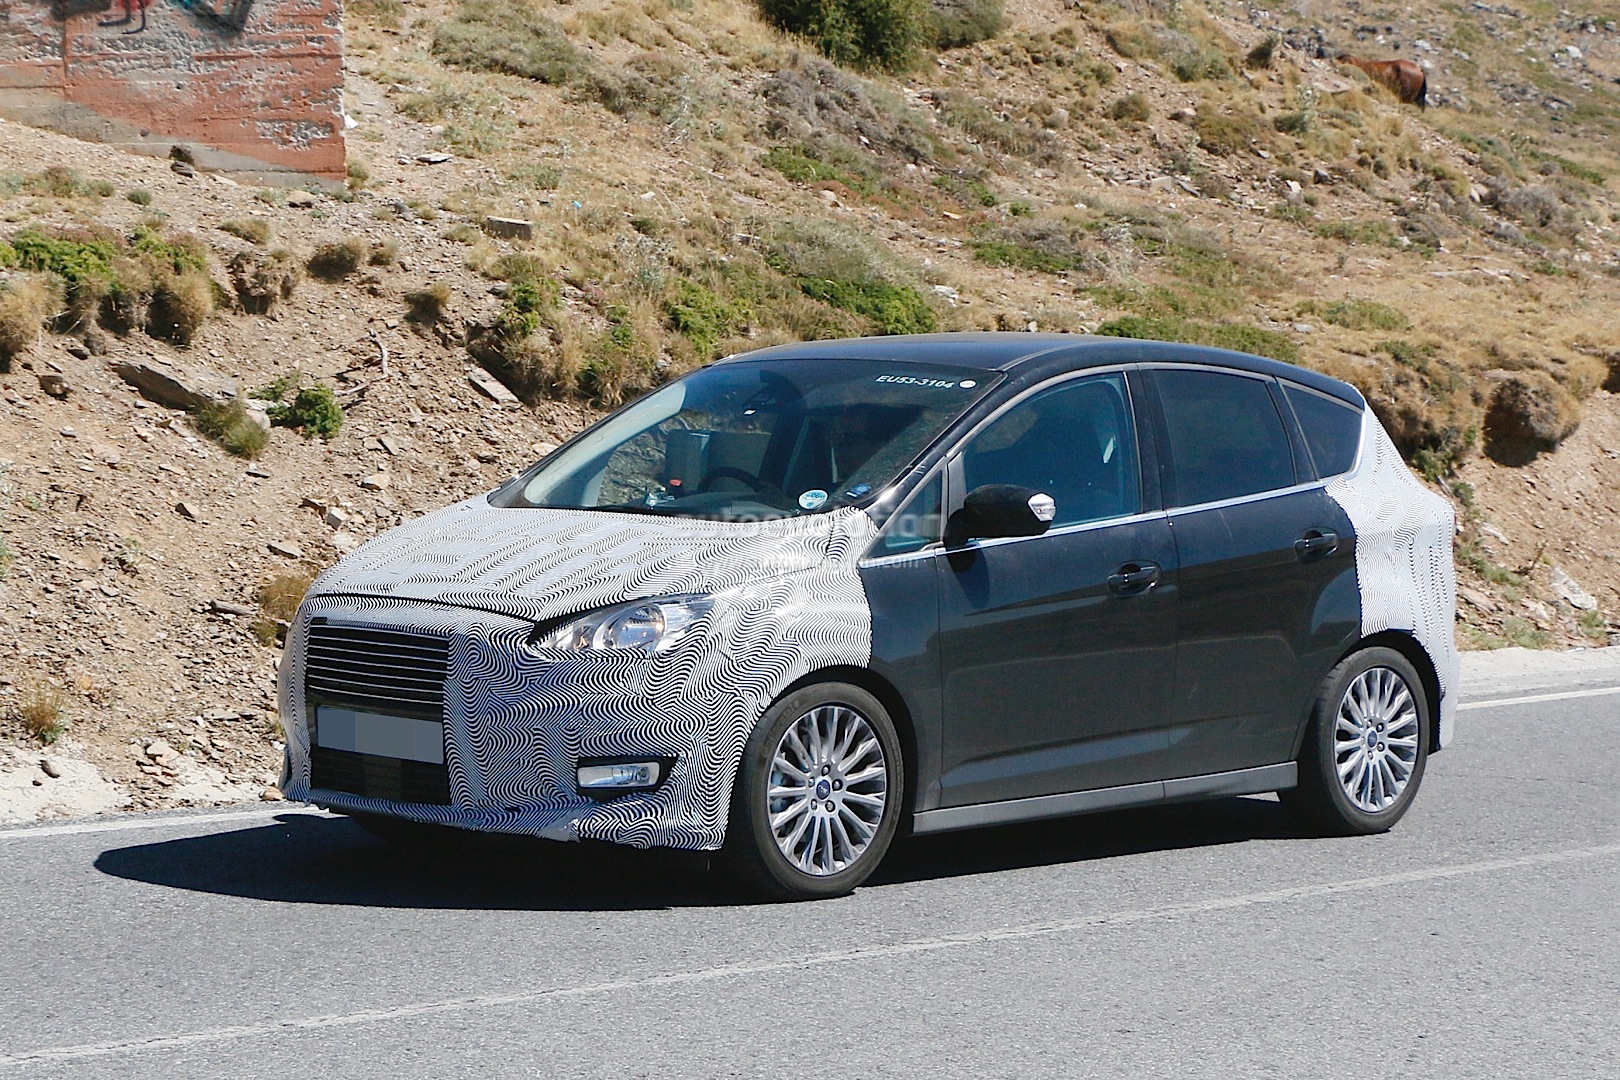 2015 Ford CMax Facelift Spied autoevolution